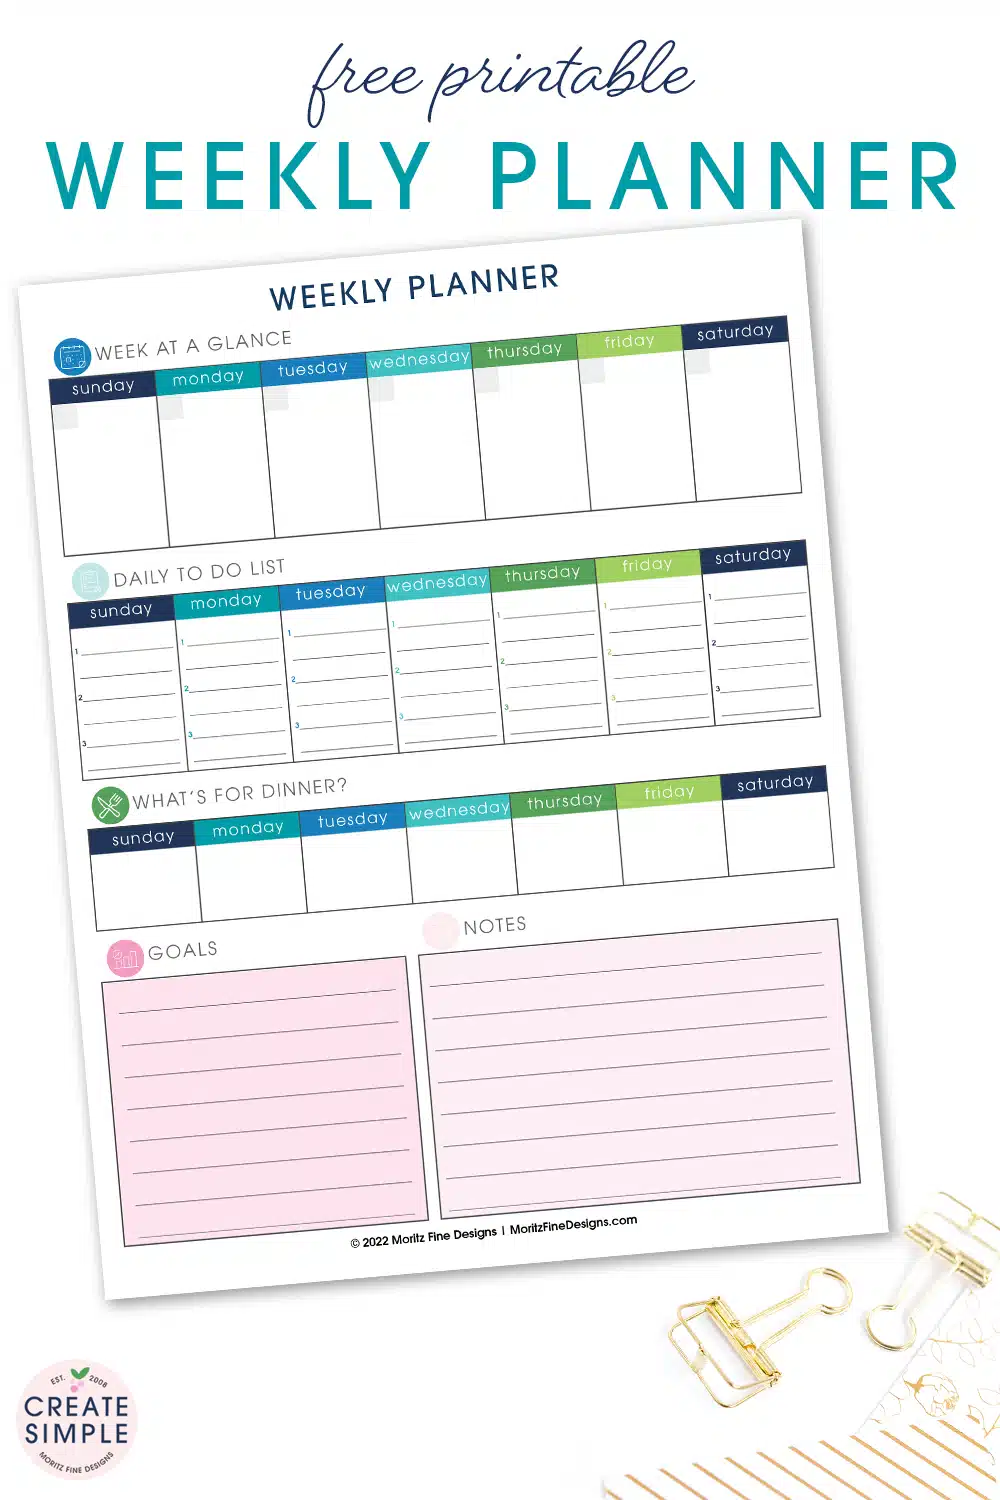 Use our Weekly Planner to get super organized—including a calendar, meal planner, to-do list, goals and notes all on one page.